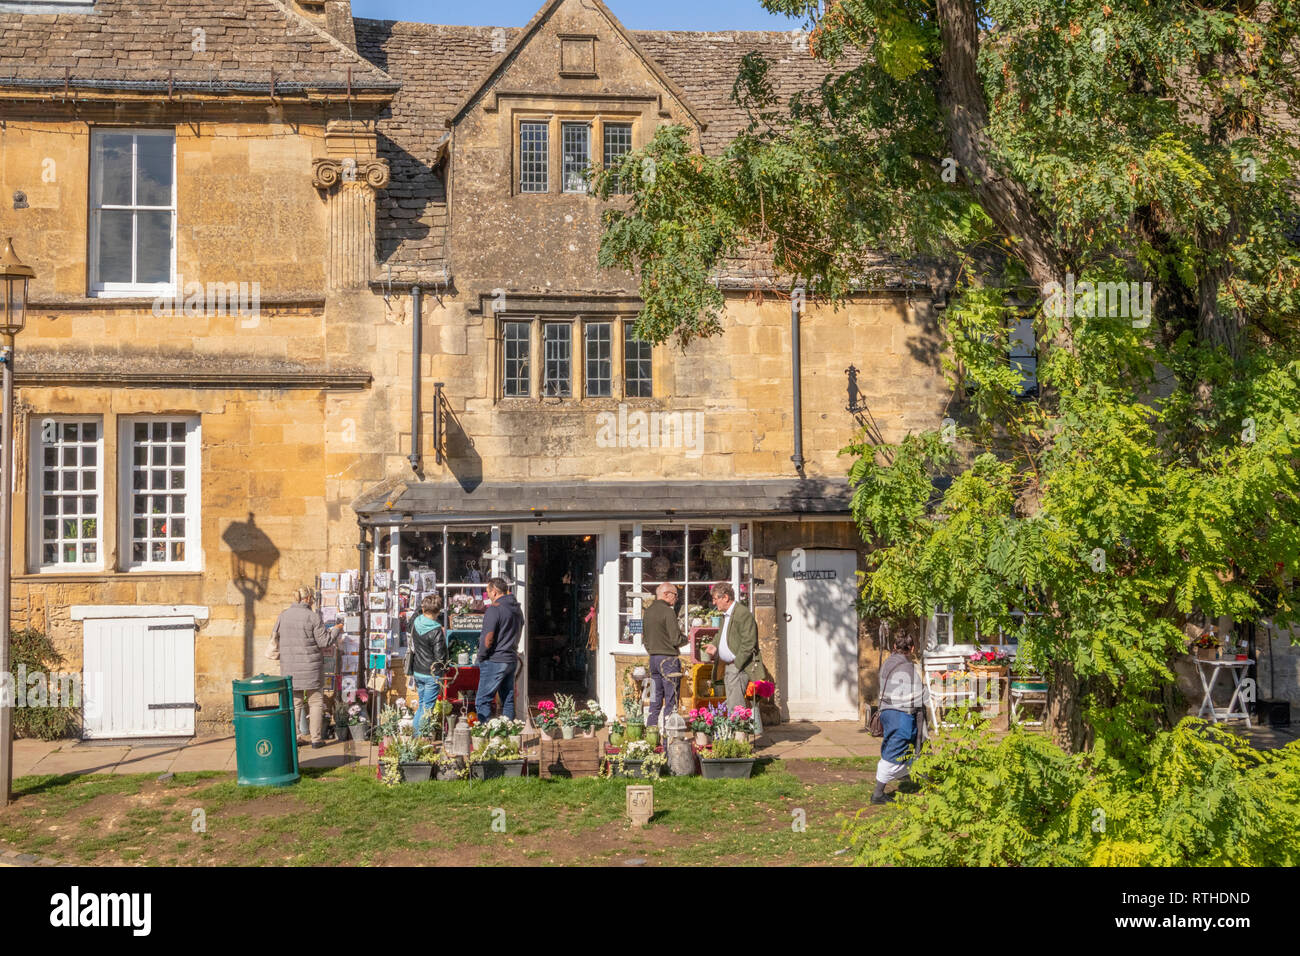 A shop in an old building in the High Street in the Cotswold town of Chipping Campden, Gloucestershire UK Stock Photo